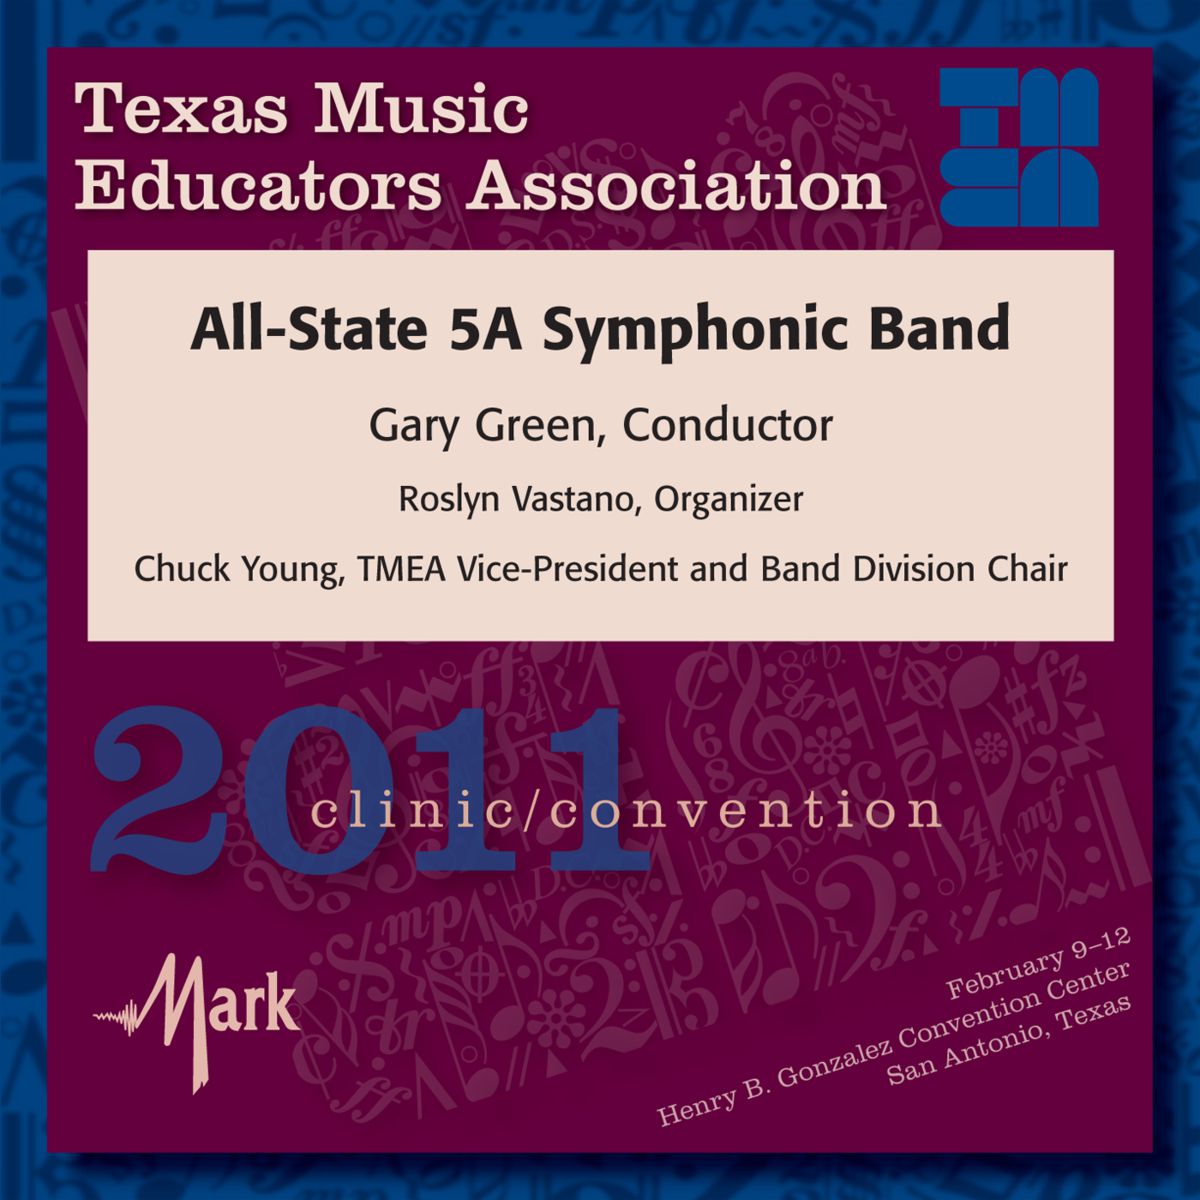 2011 Texas Music Educators Association: All-State 5A Symphonic Band - click here